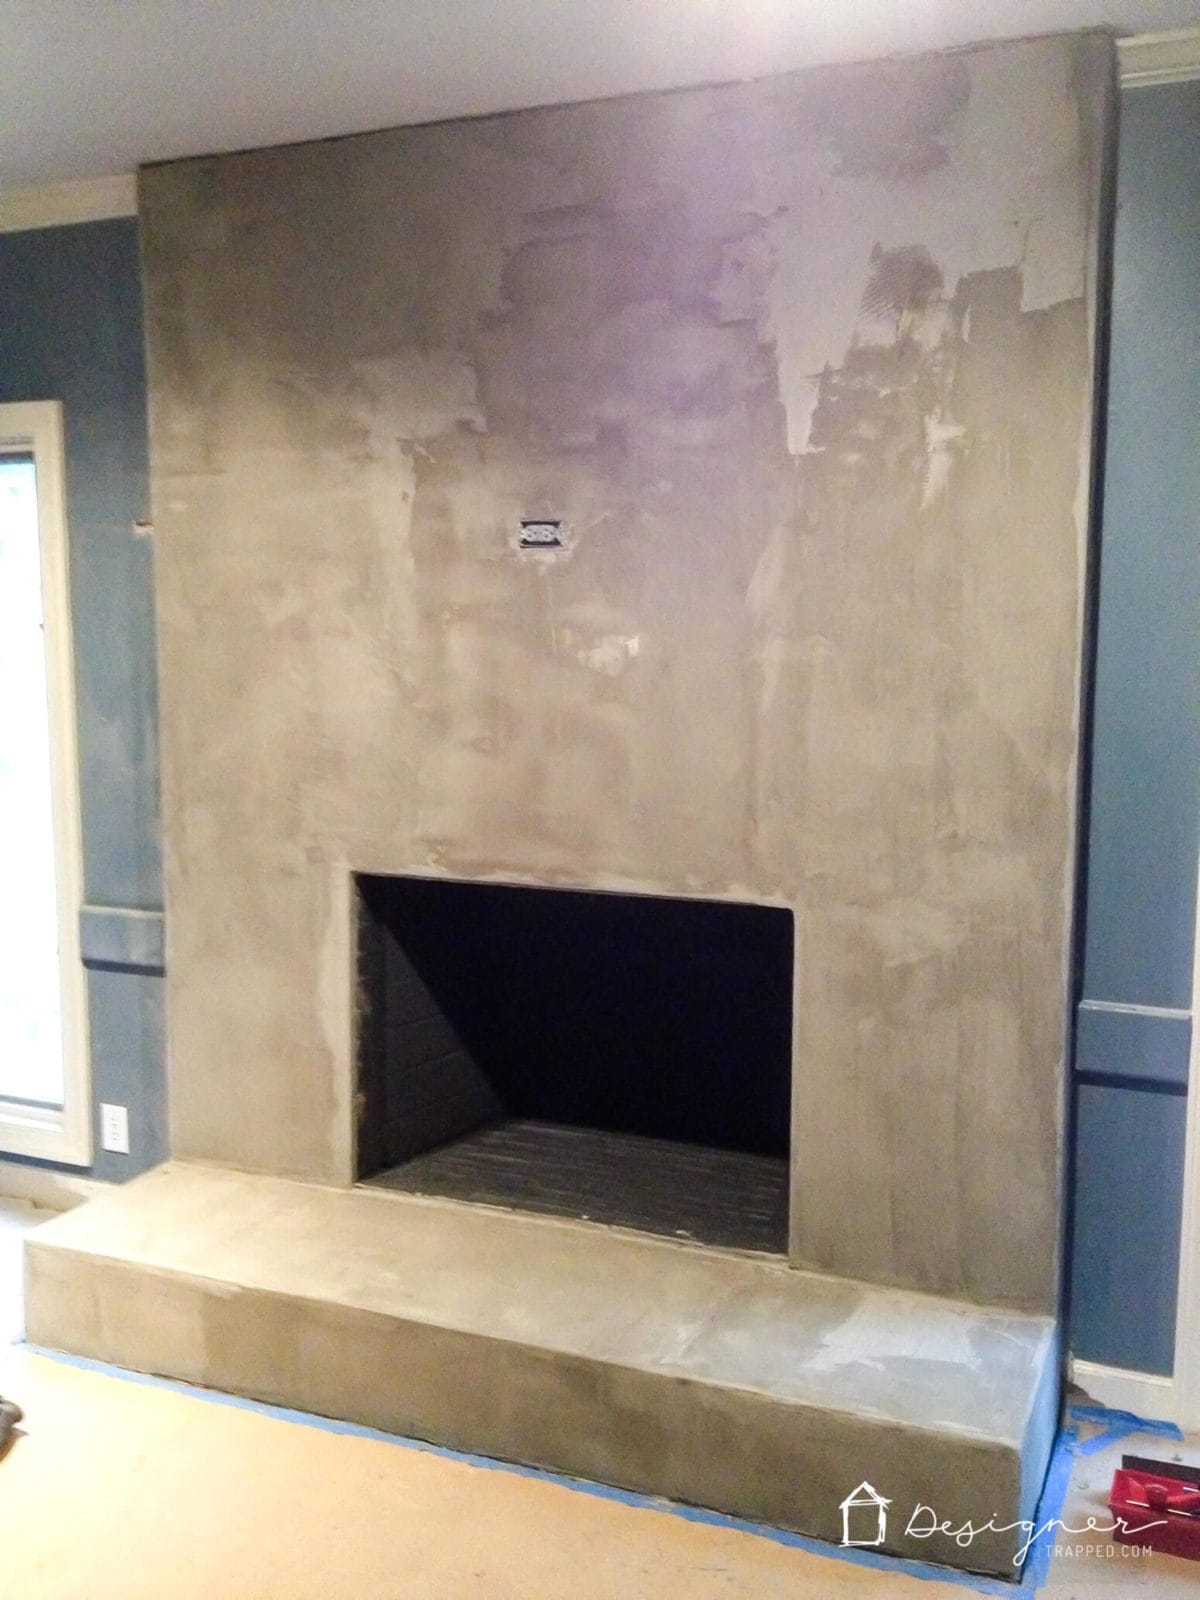 You can create a contemporary fireplace with concrete for less than $100. This full DIY concrete fireplace tutorial will show you exactly how!